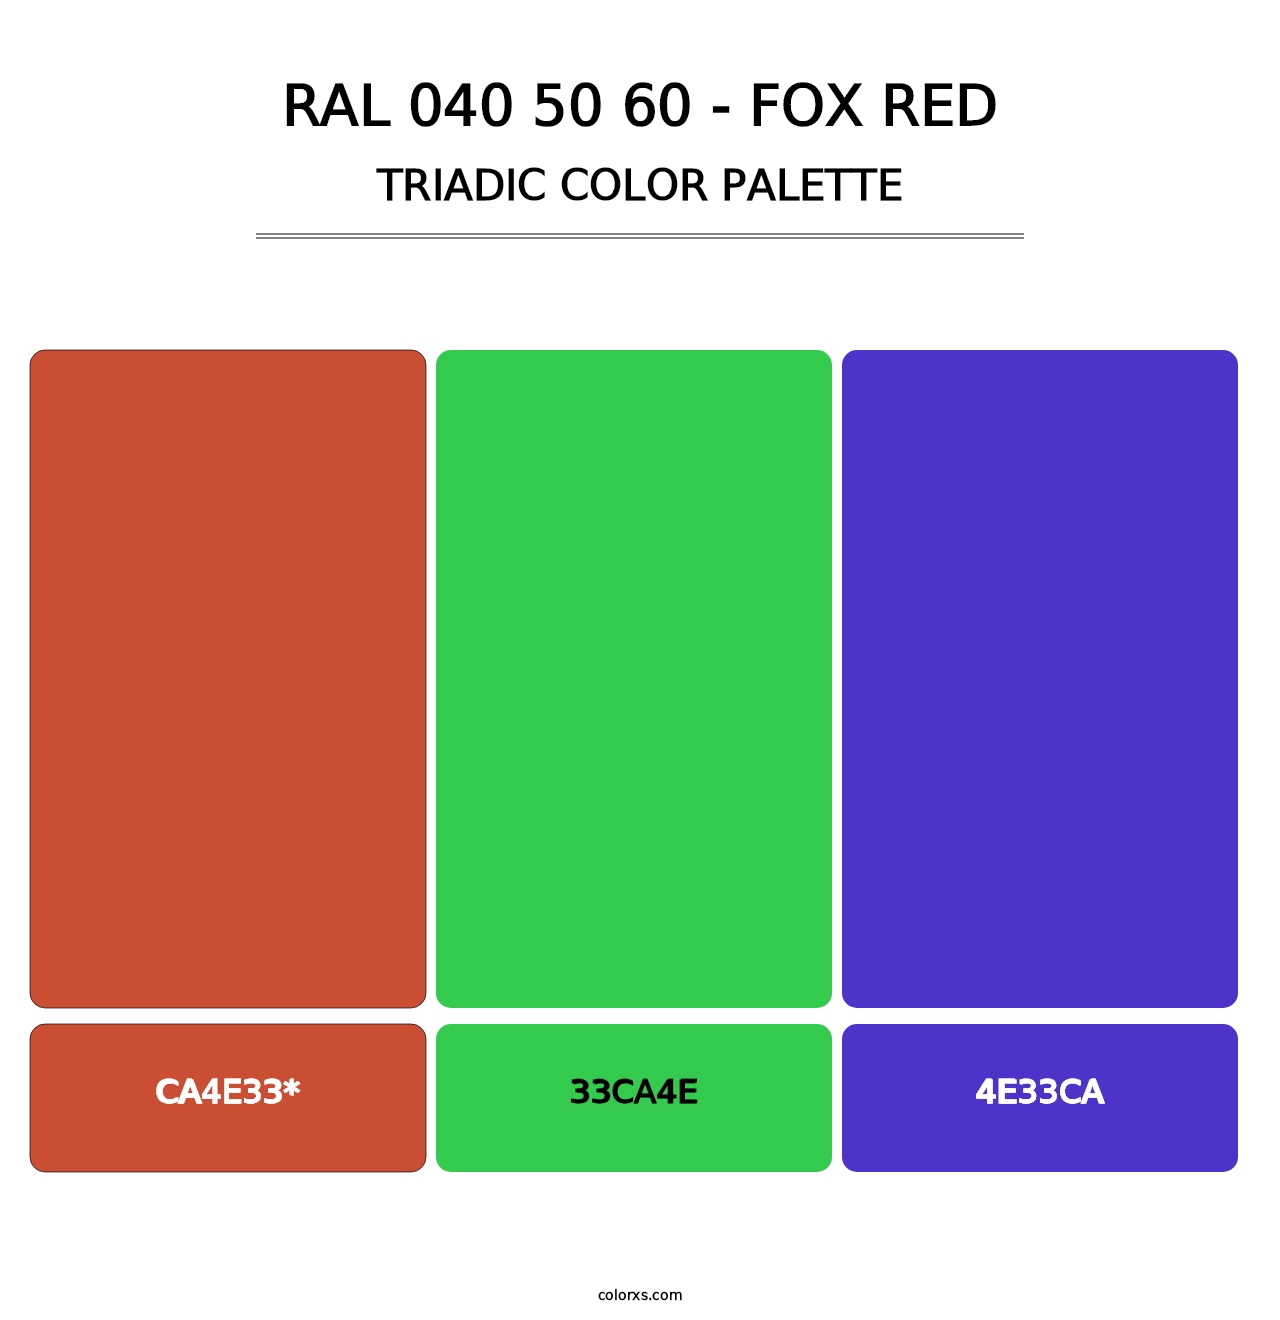 RAL 040 50 60 - Fox Red - Triadic Color Palette